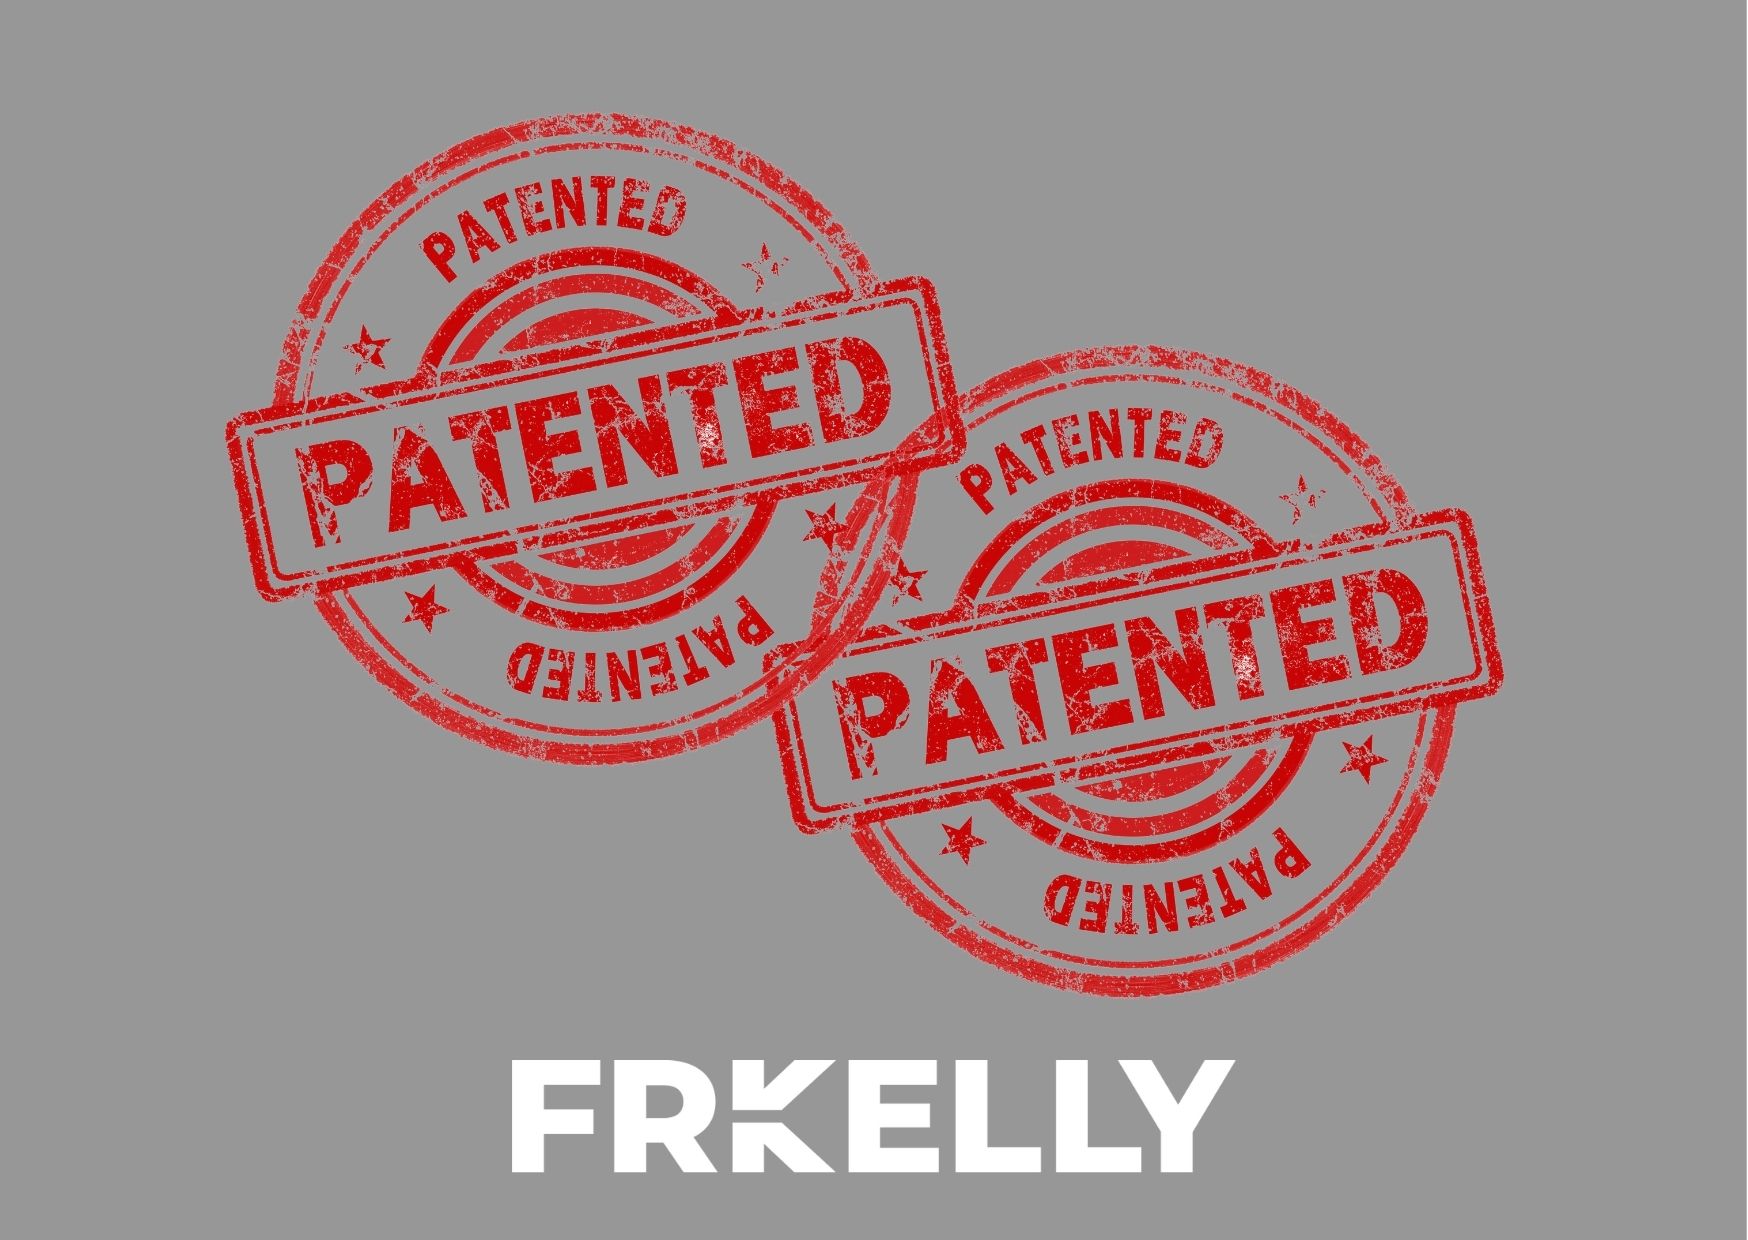 Two patent stamps, depicting double patenting, with the FRKelly logo